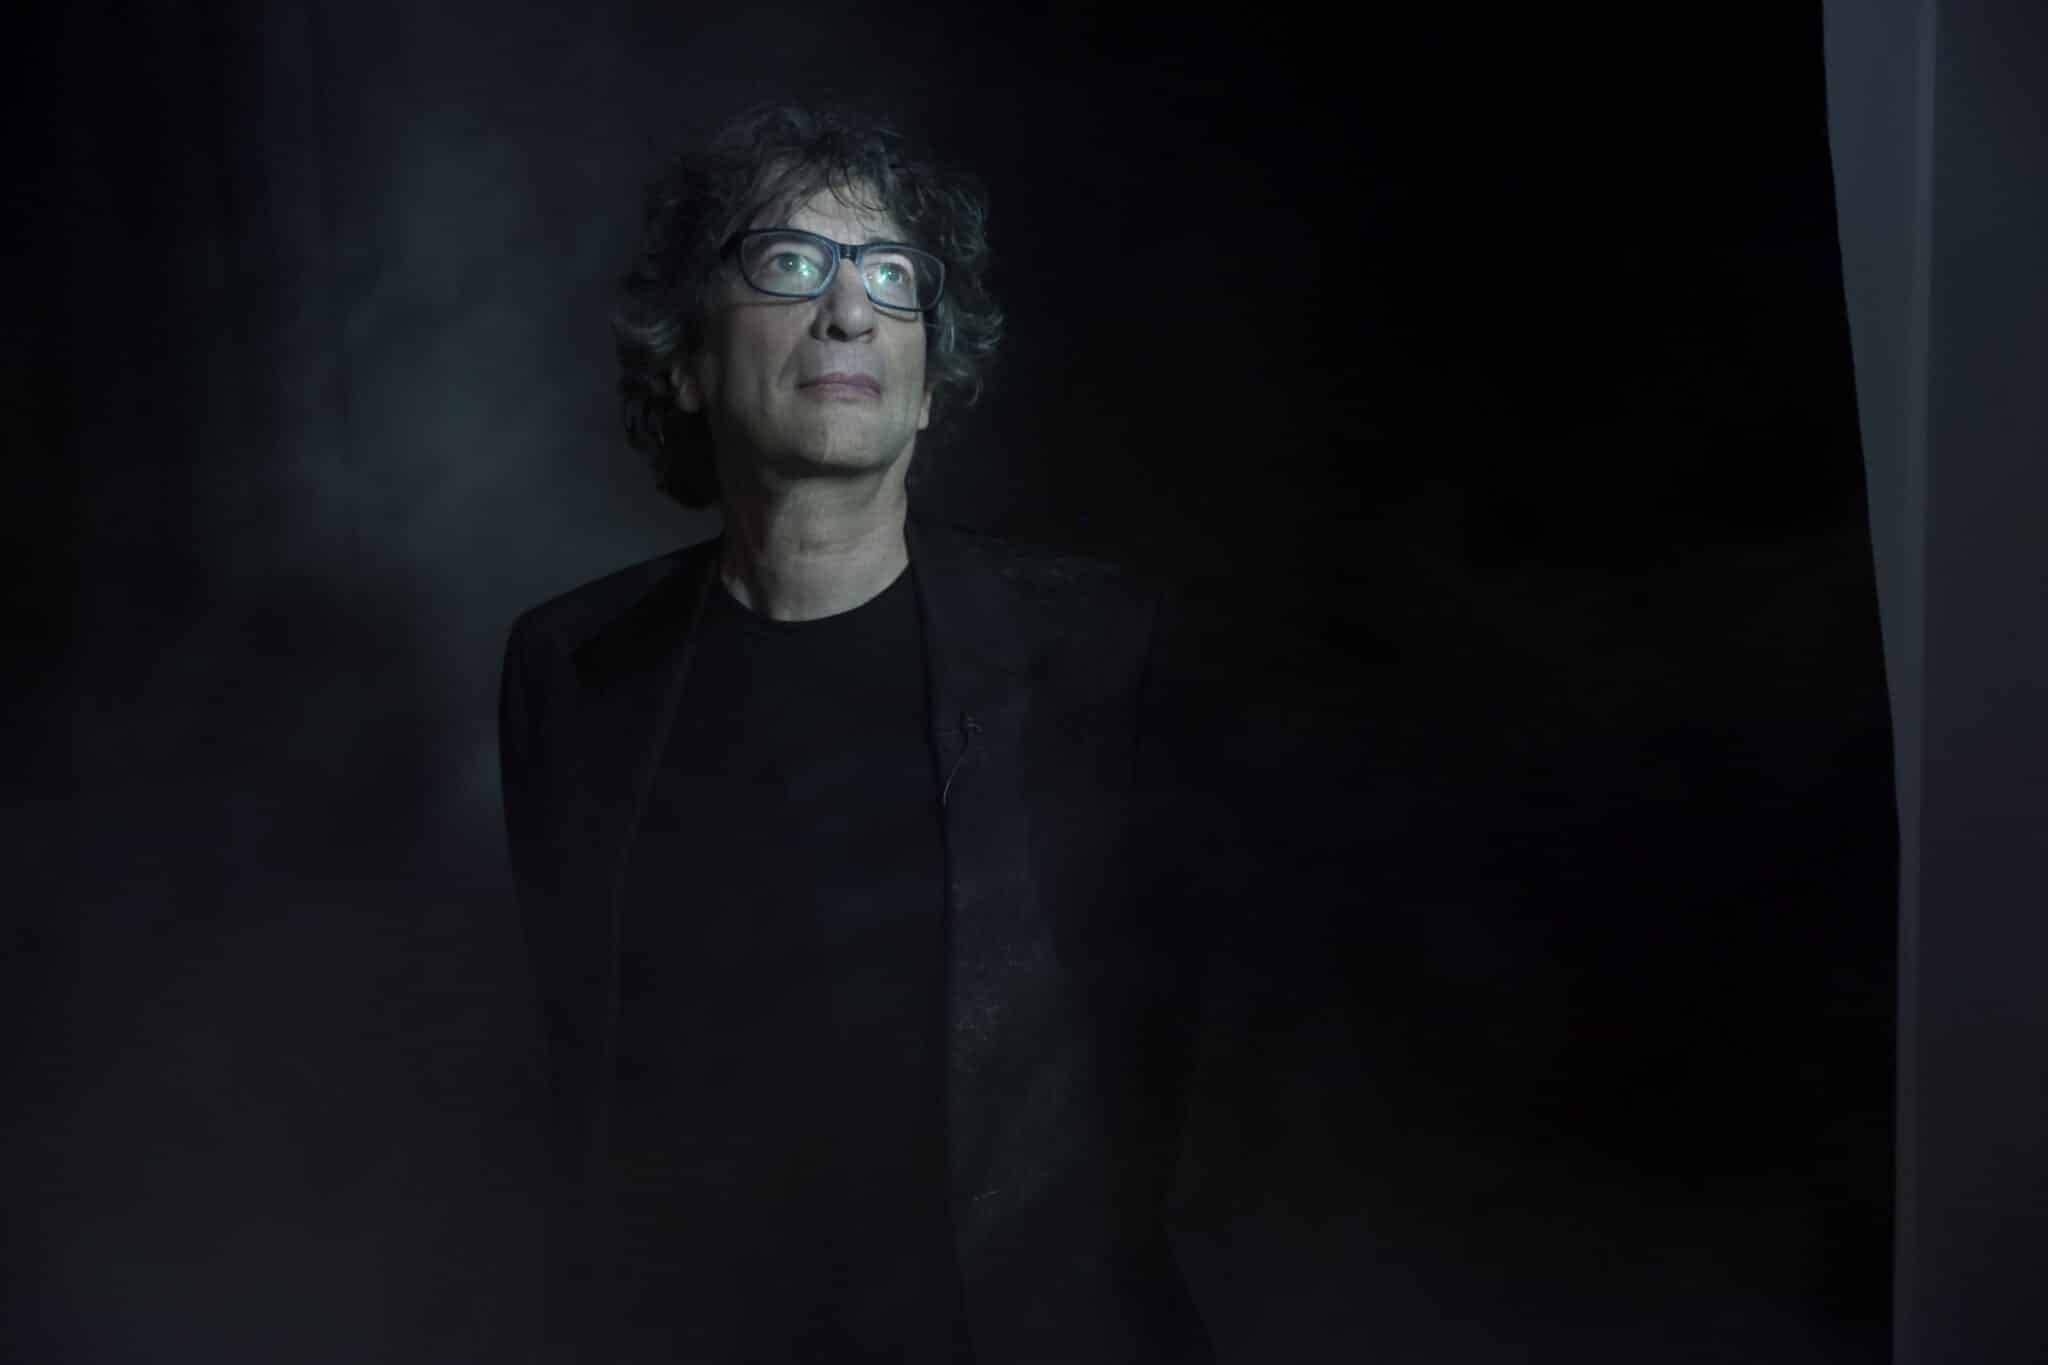 Neil Gaiman confirmed the second season after rumours circulated. 